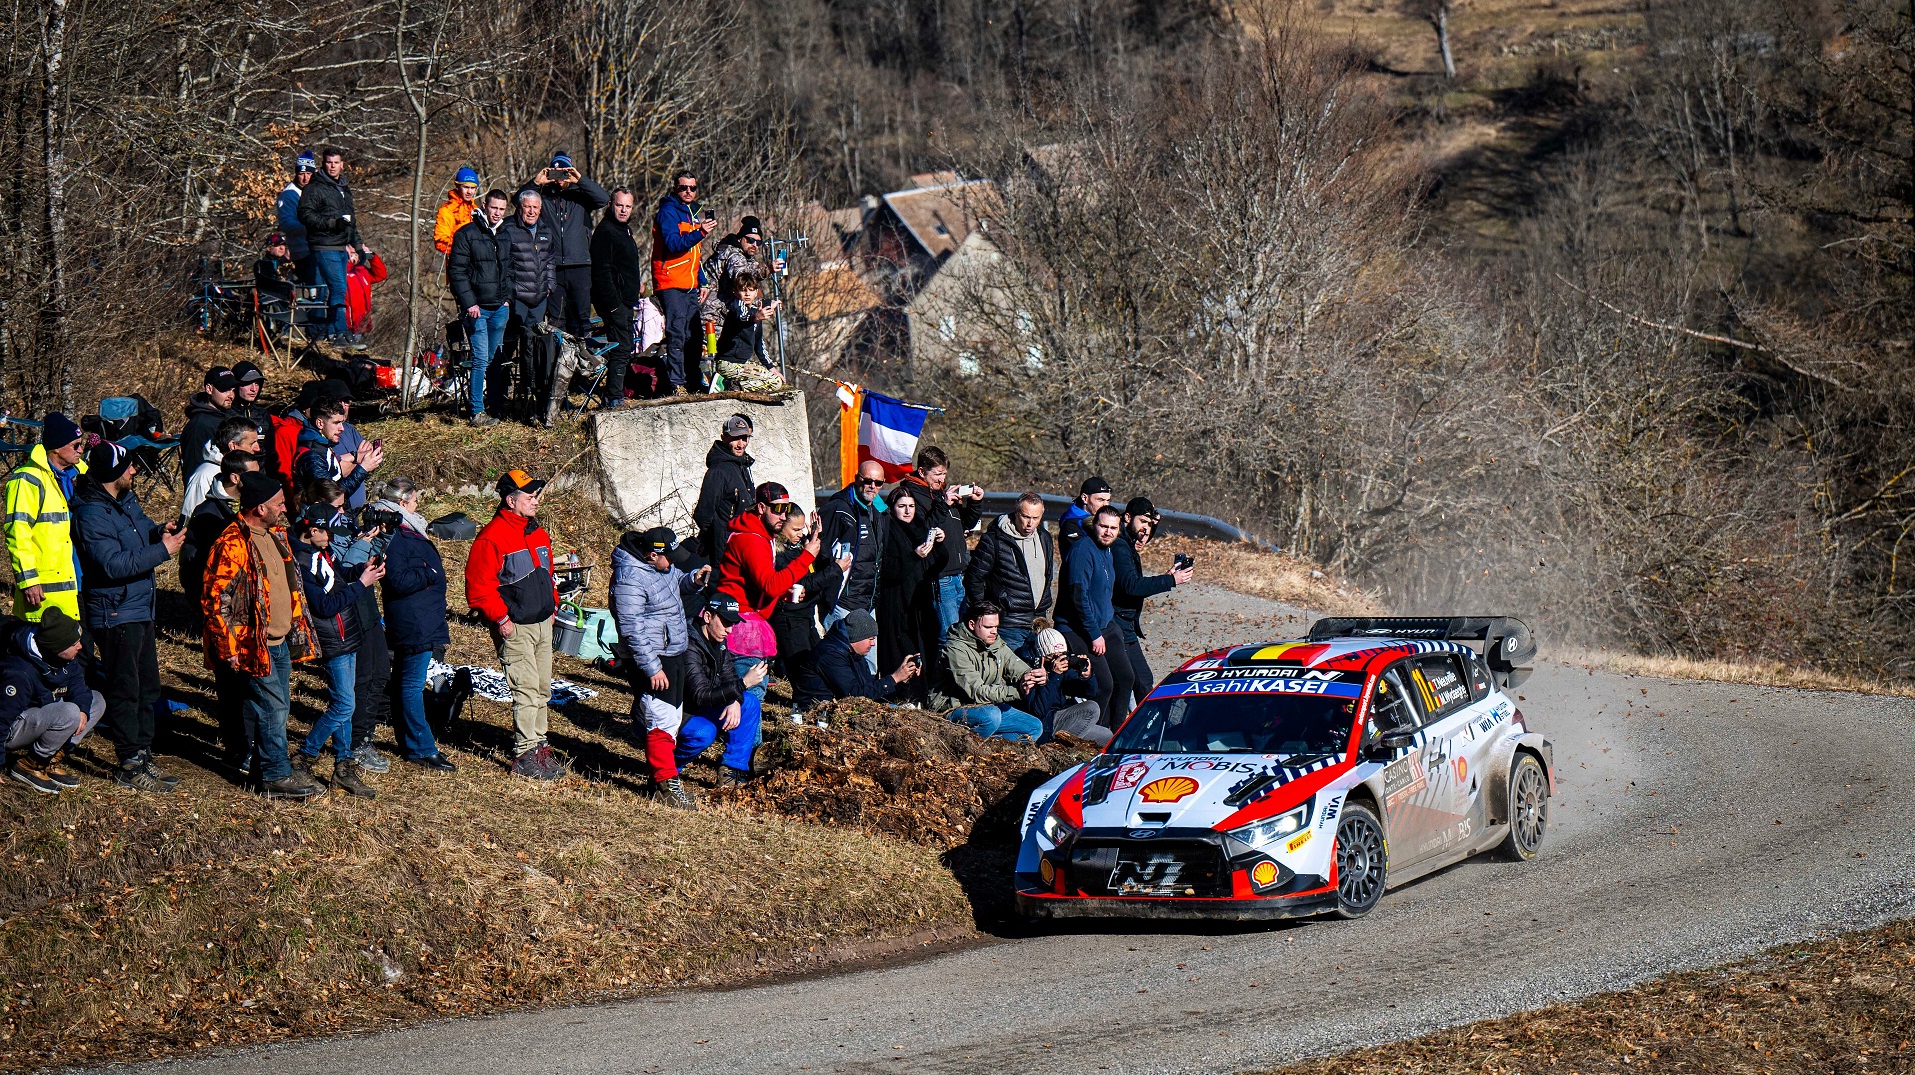 Thierry Neuville (BEL) and Martijn Wydaeghe (BEL) are seen competing during the World Rally Championship Monte-Carlo in Gap, France on 27.01.2024 // @World / Red Bull Content Pool // SI202401270352 // Usage for editorial use only //